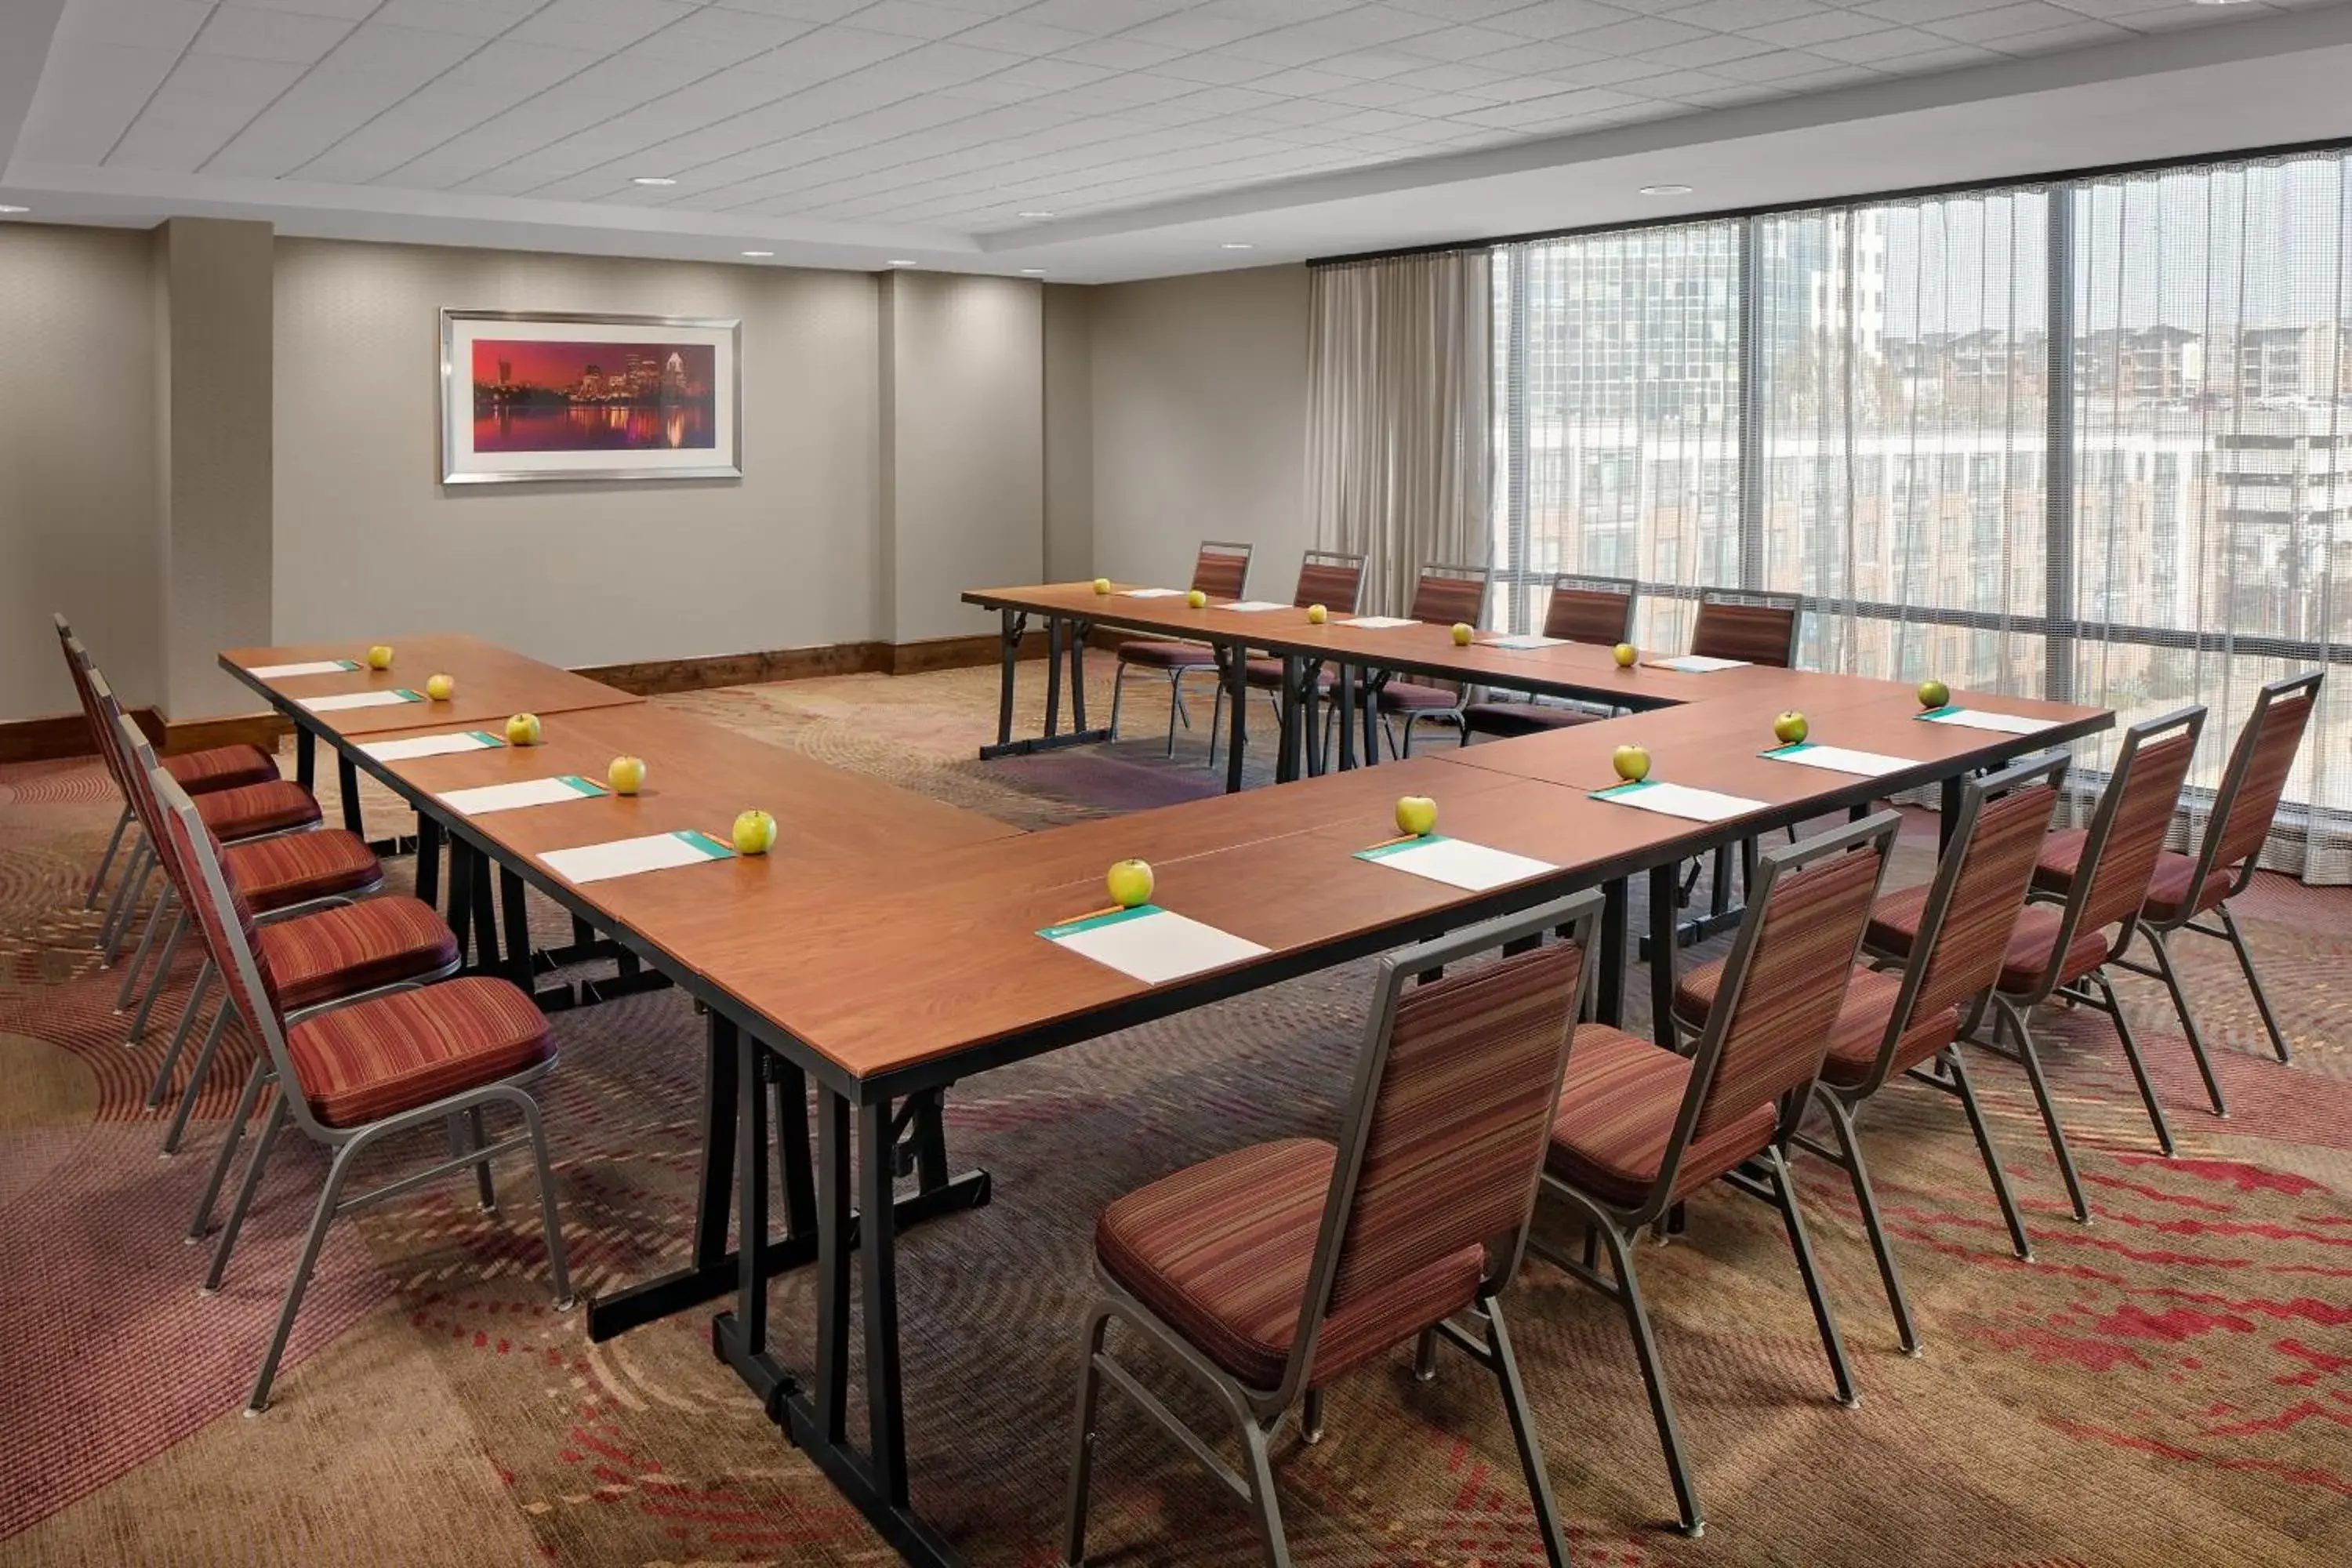 Meeting/conference room in Hotel Indigo Austin Downtown, an IHG Hotel